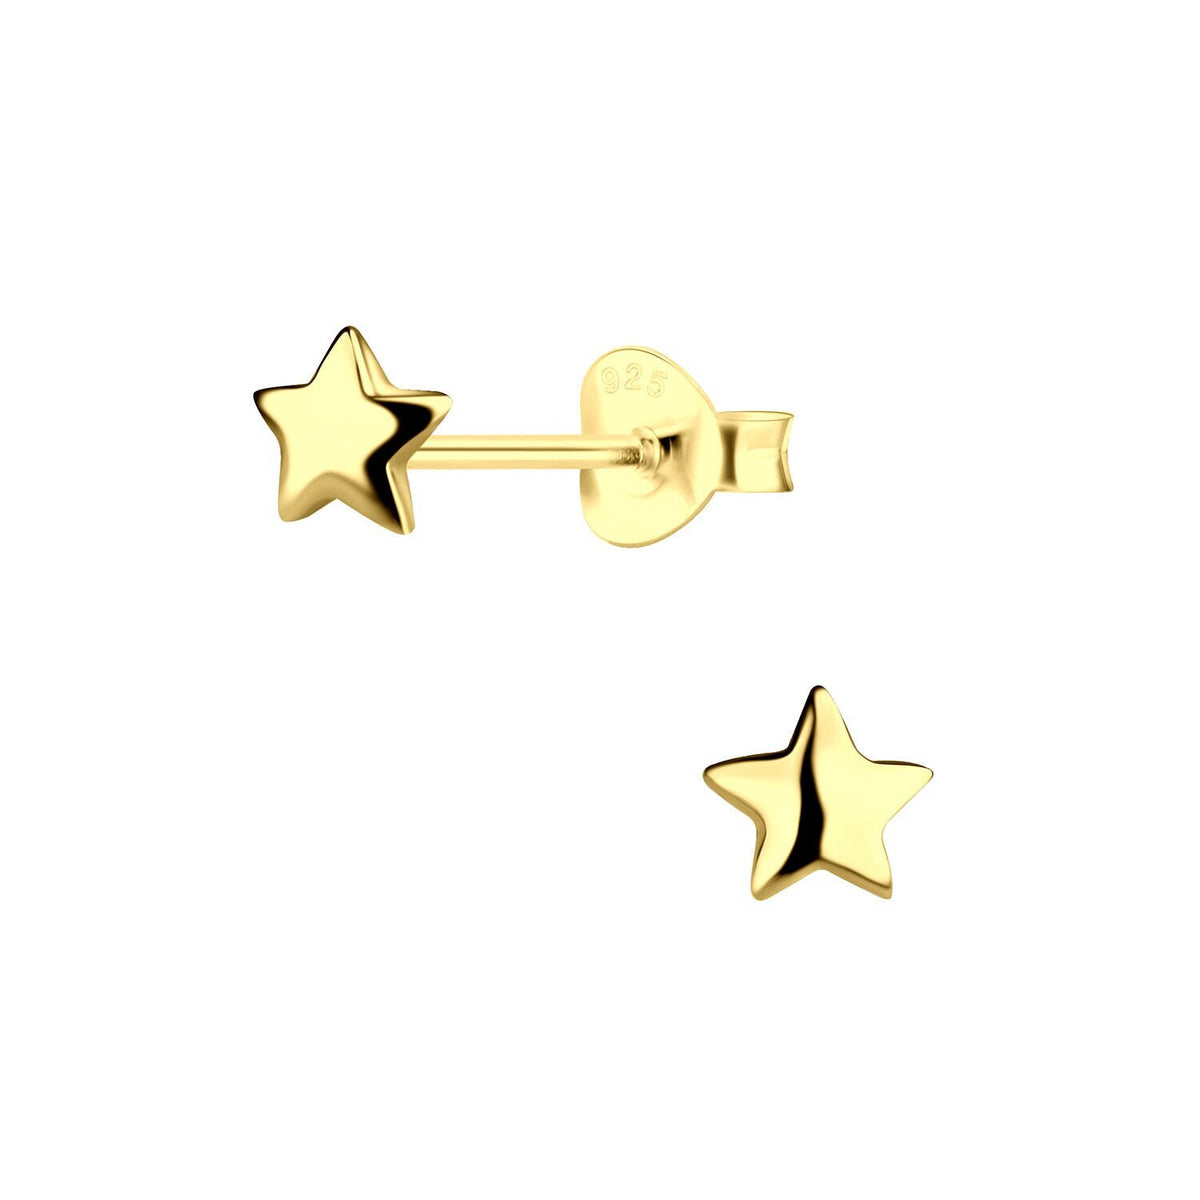 Small Star Stud Earrings With Yellow Gold Plating 5x5 mm